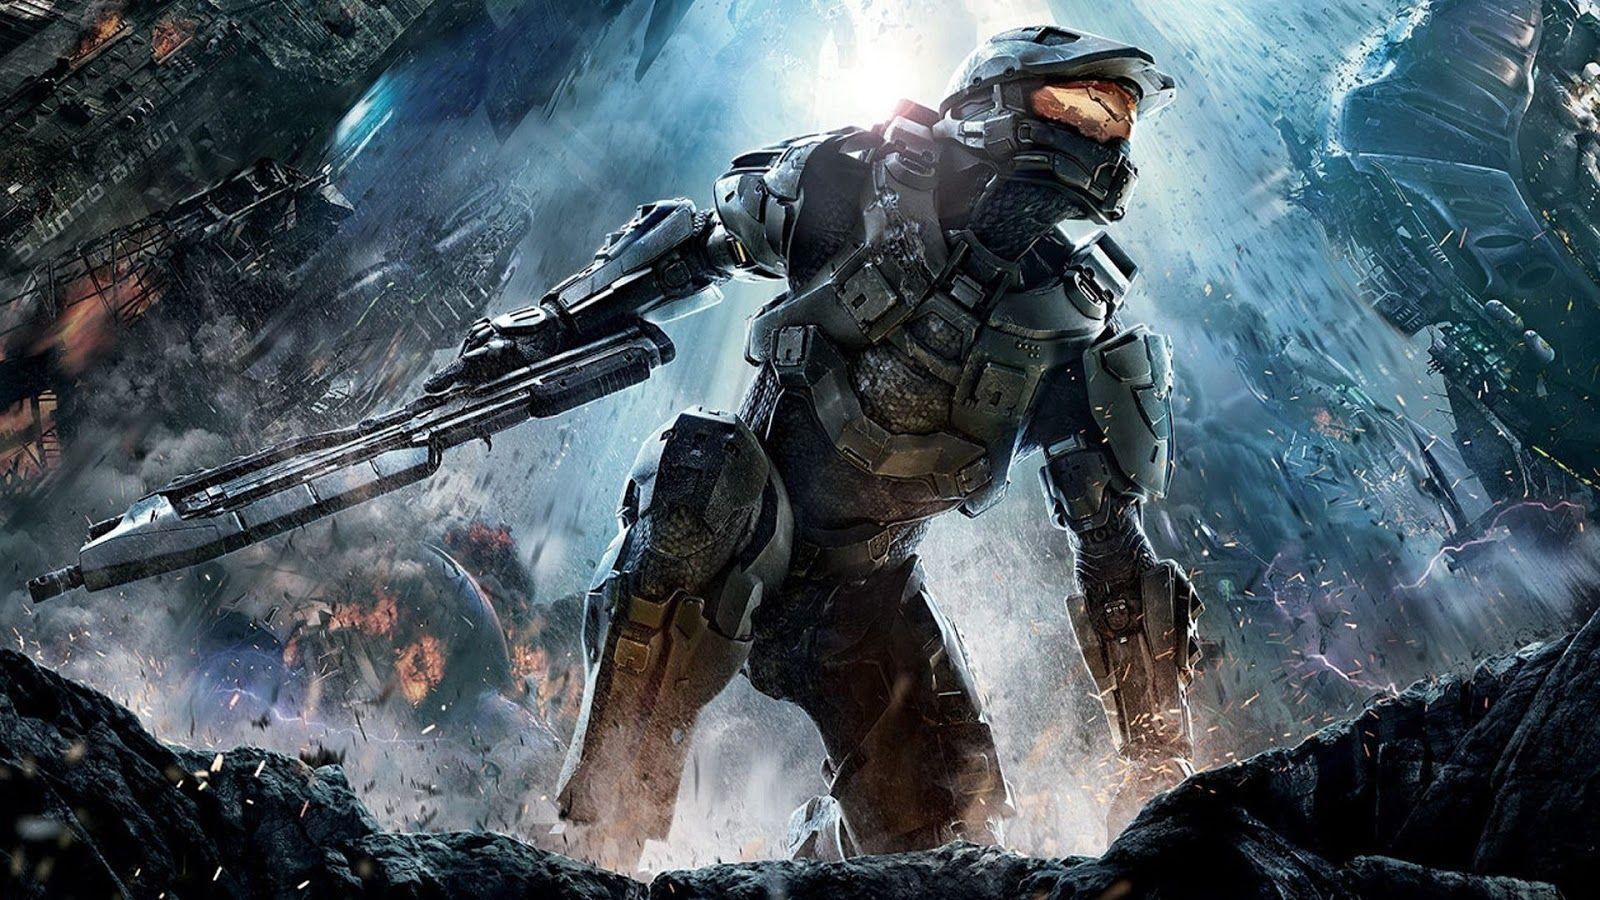 Halo: Spartan Assault now available for Windows 8 devices